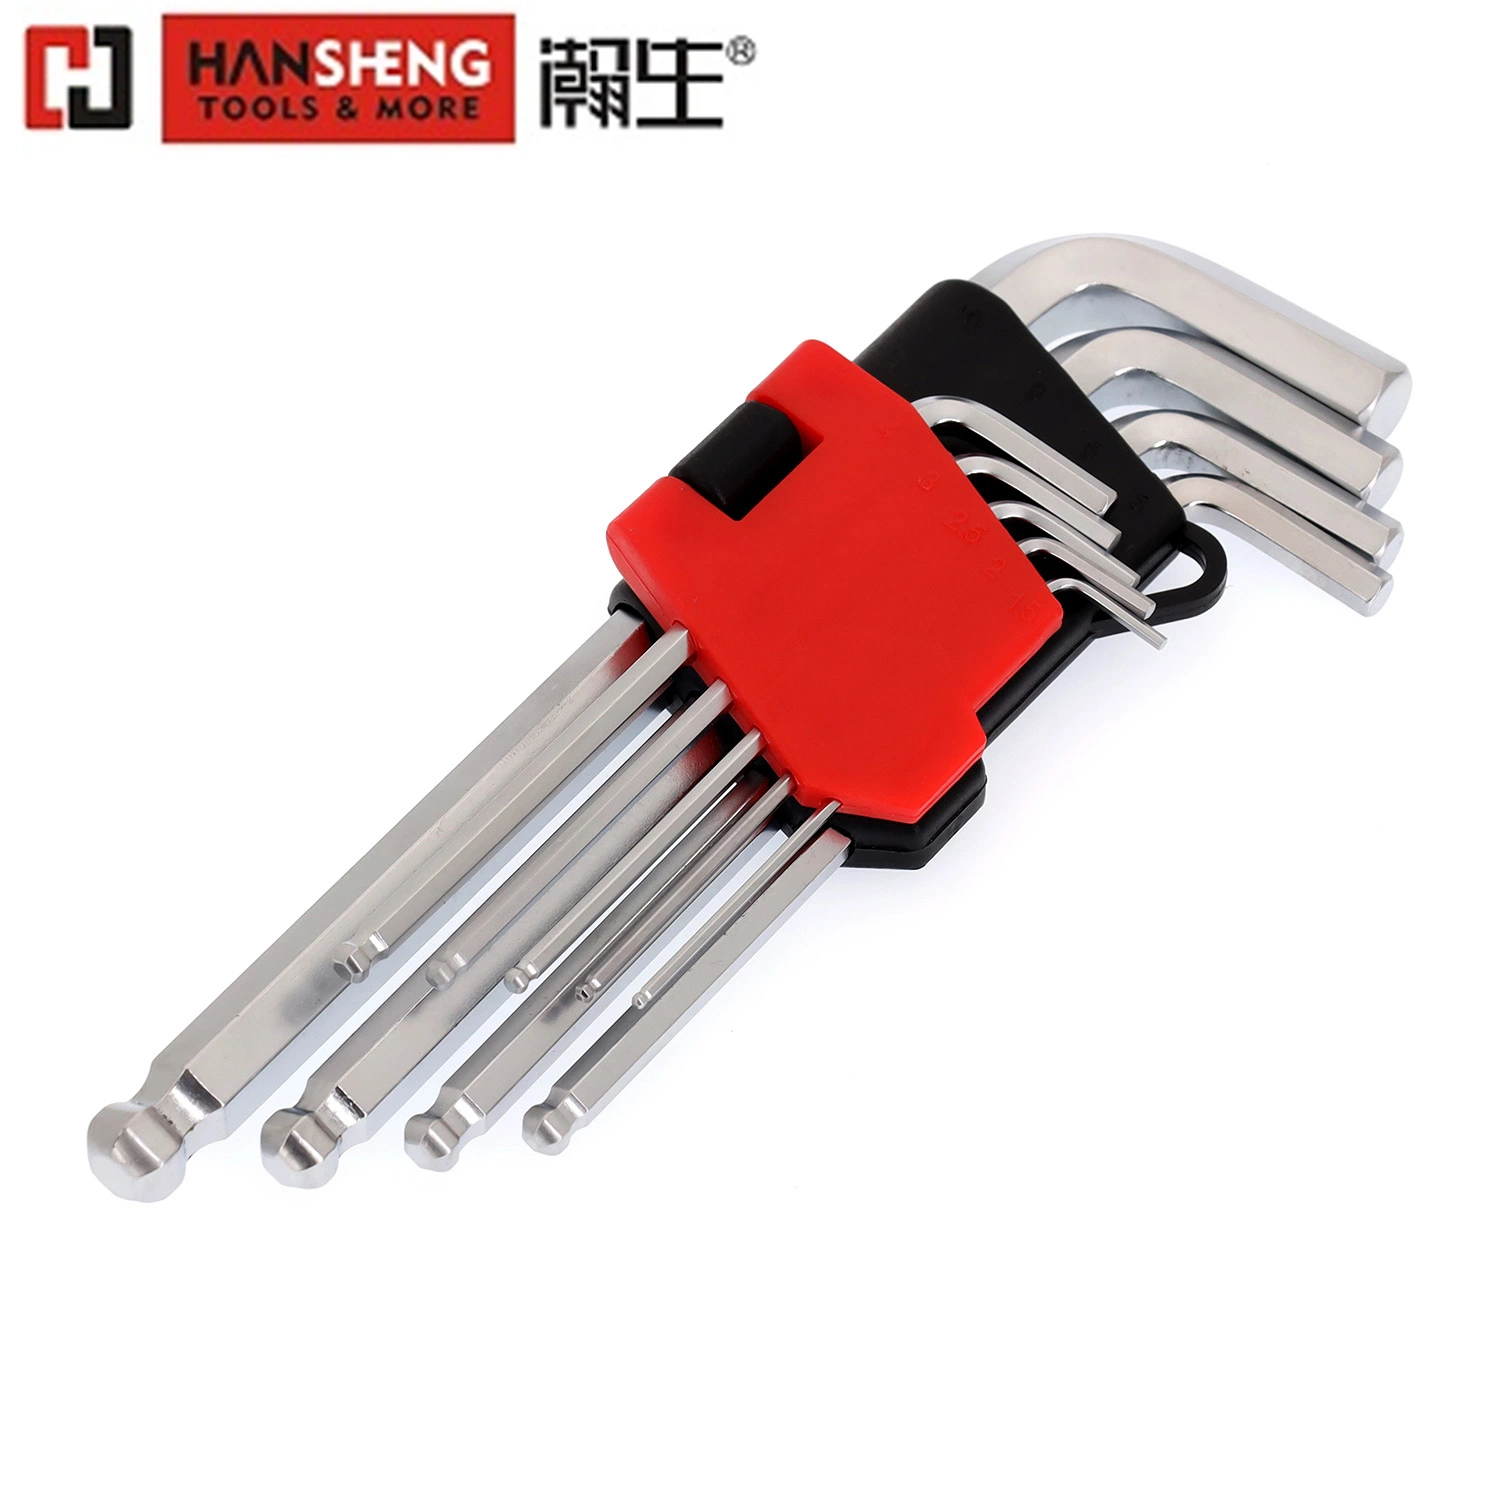 Wrench Professional Hand Tool, Hardware Made of Carbon Steel, Cr-V, Combination Wrench Set